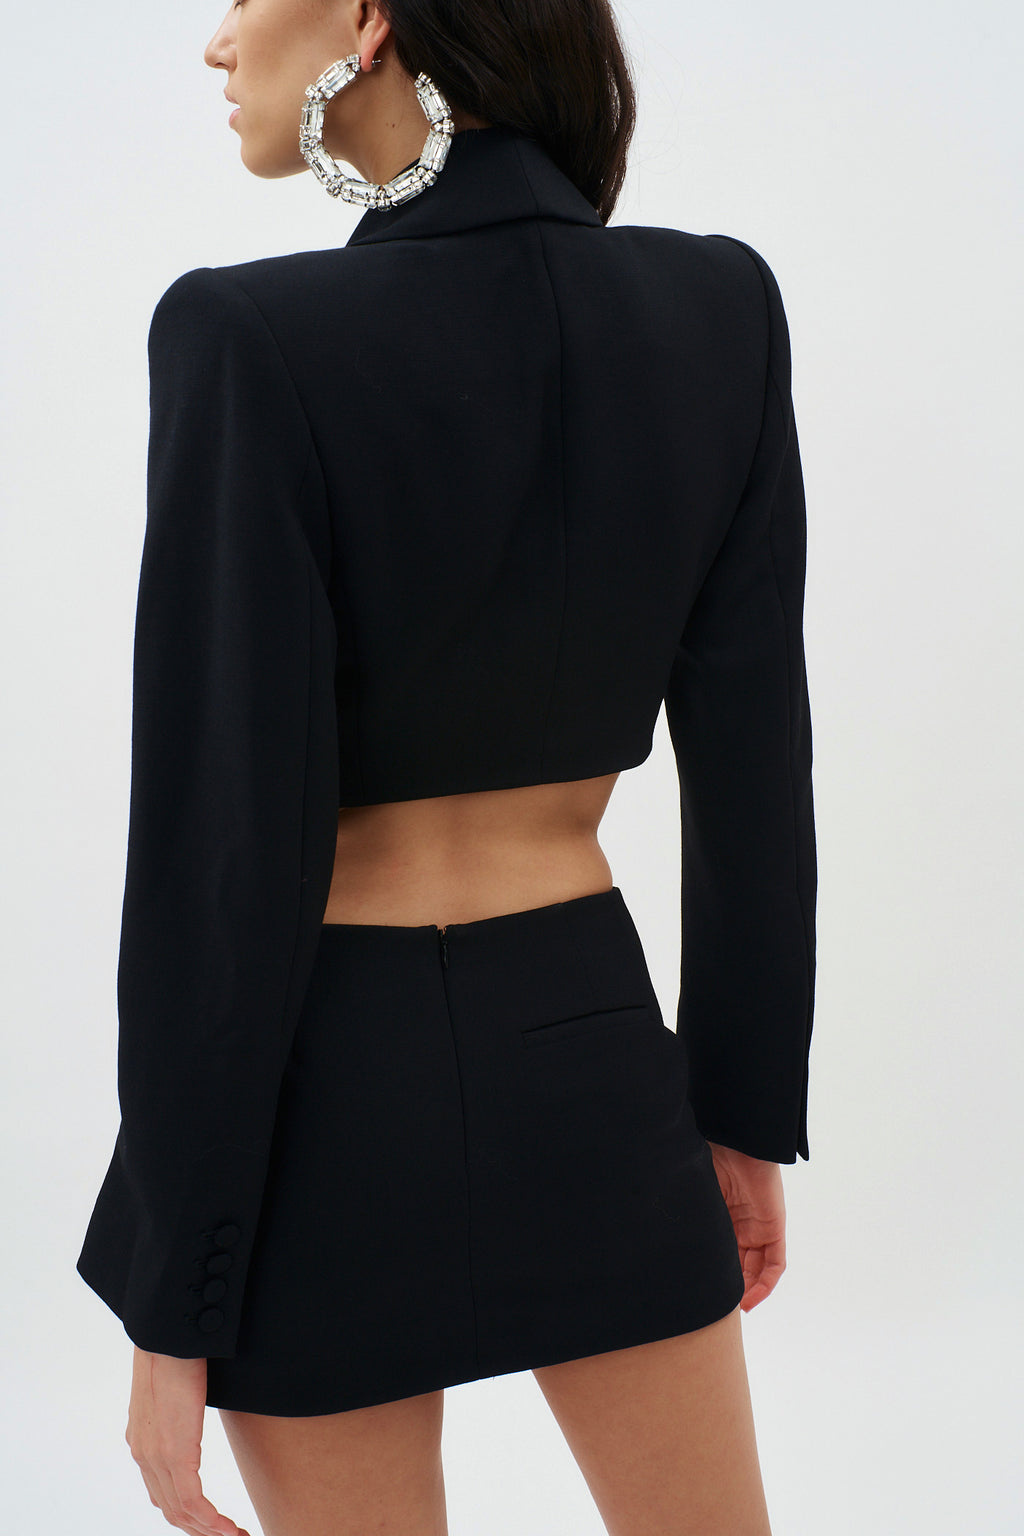 Embroidered Butterfly Black Cropped Blazer